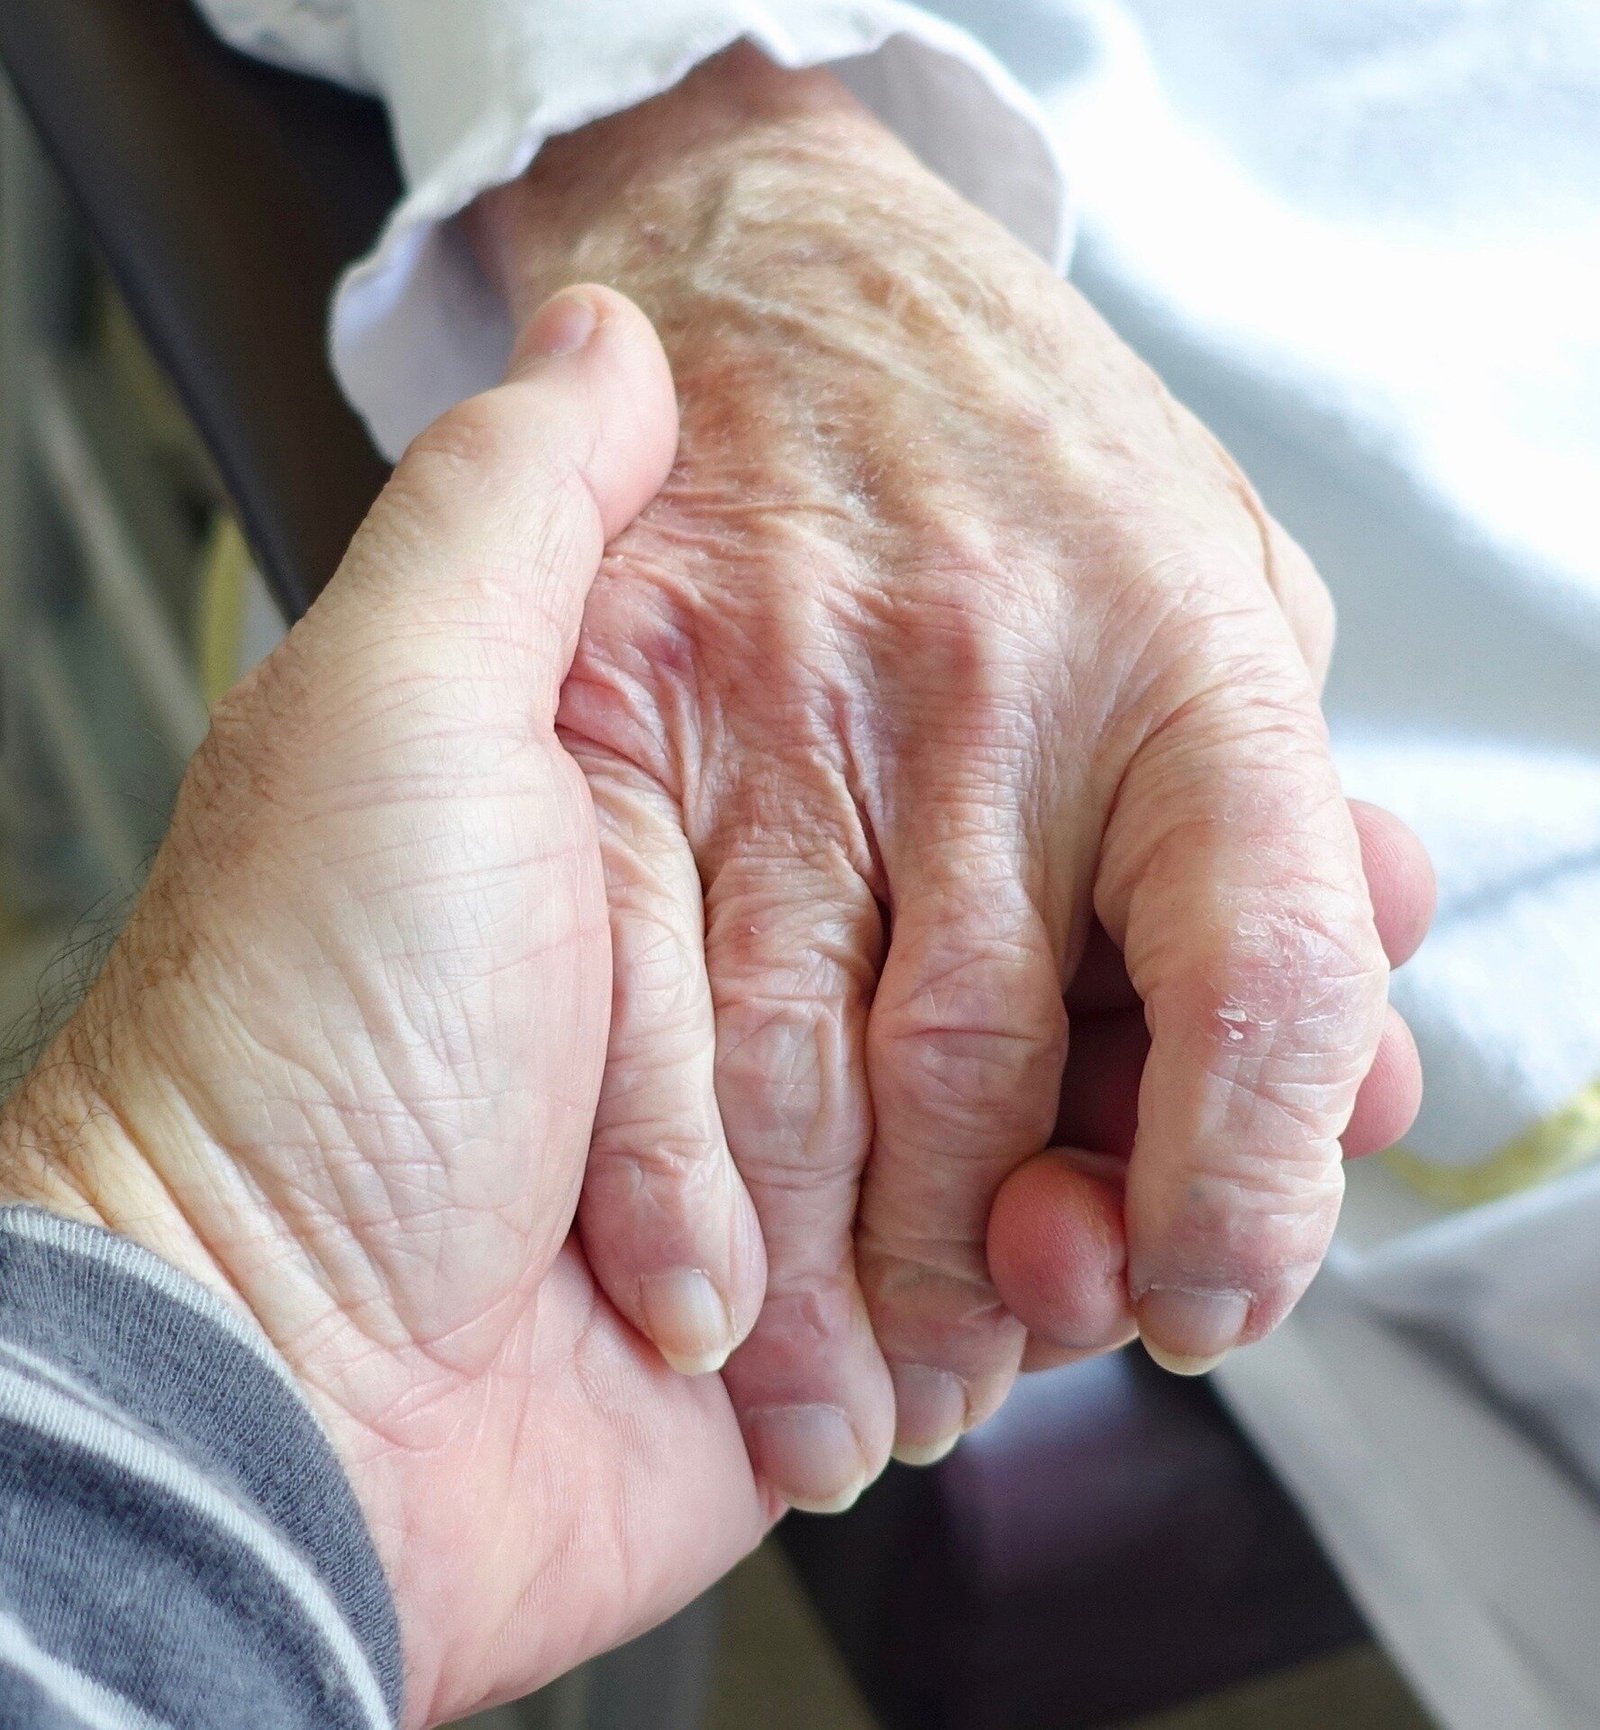 Many older adults receiving home care do not receive palliative care before death finds study